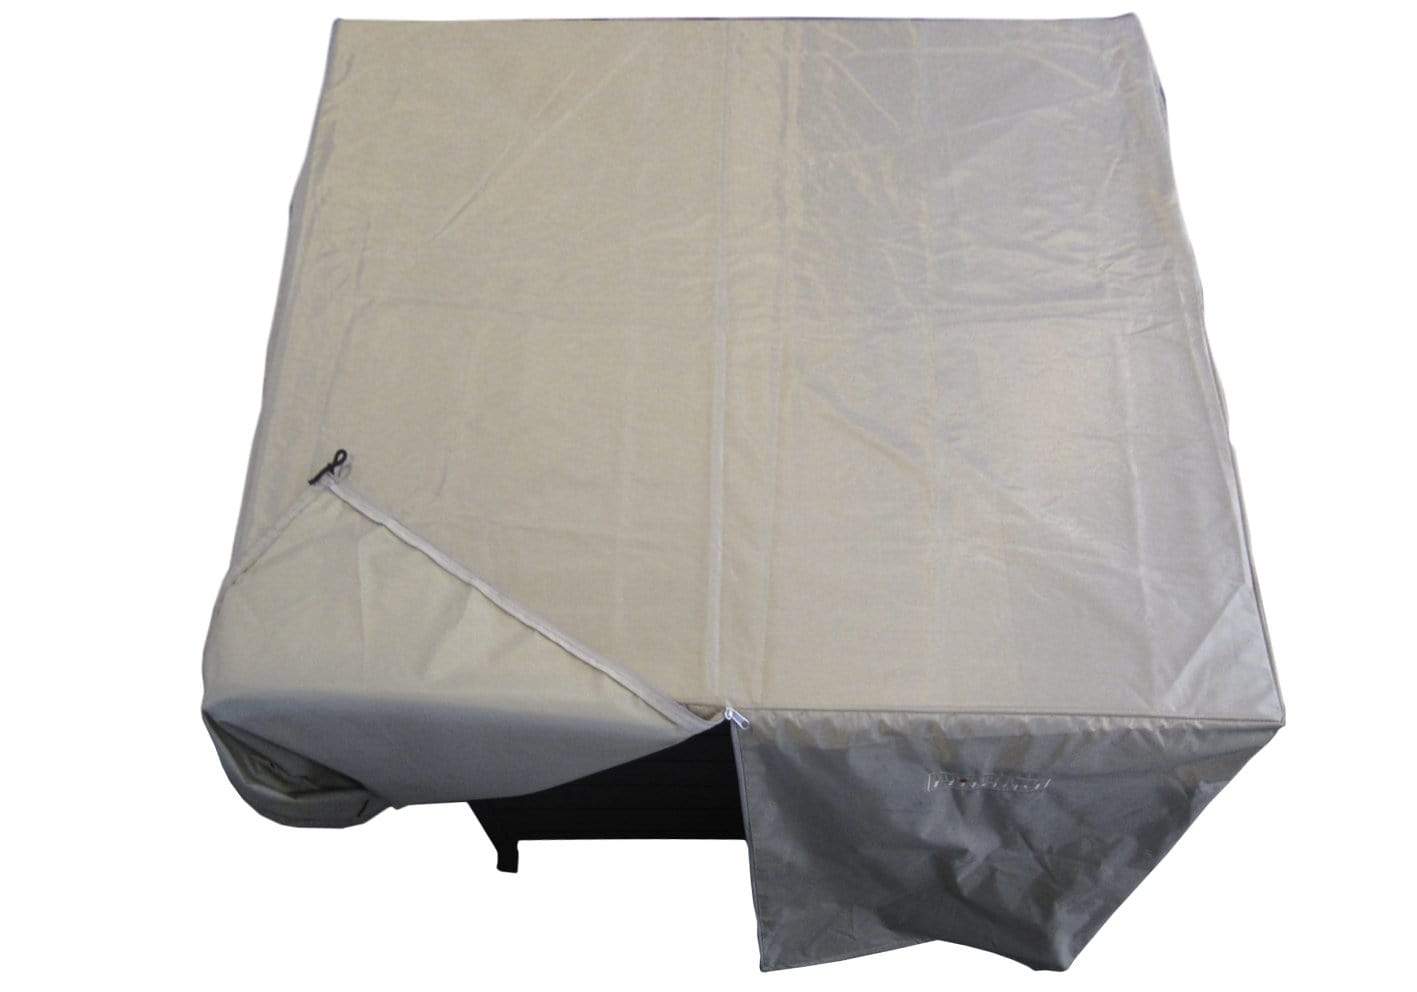 Hiland Heater Covers Hiland Patio Heaters Square Fire Pit Cover